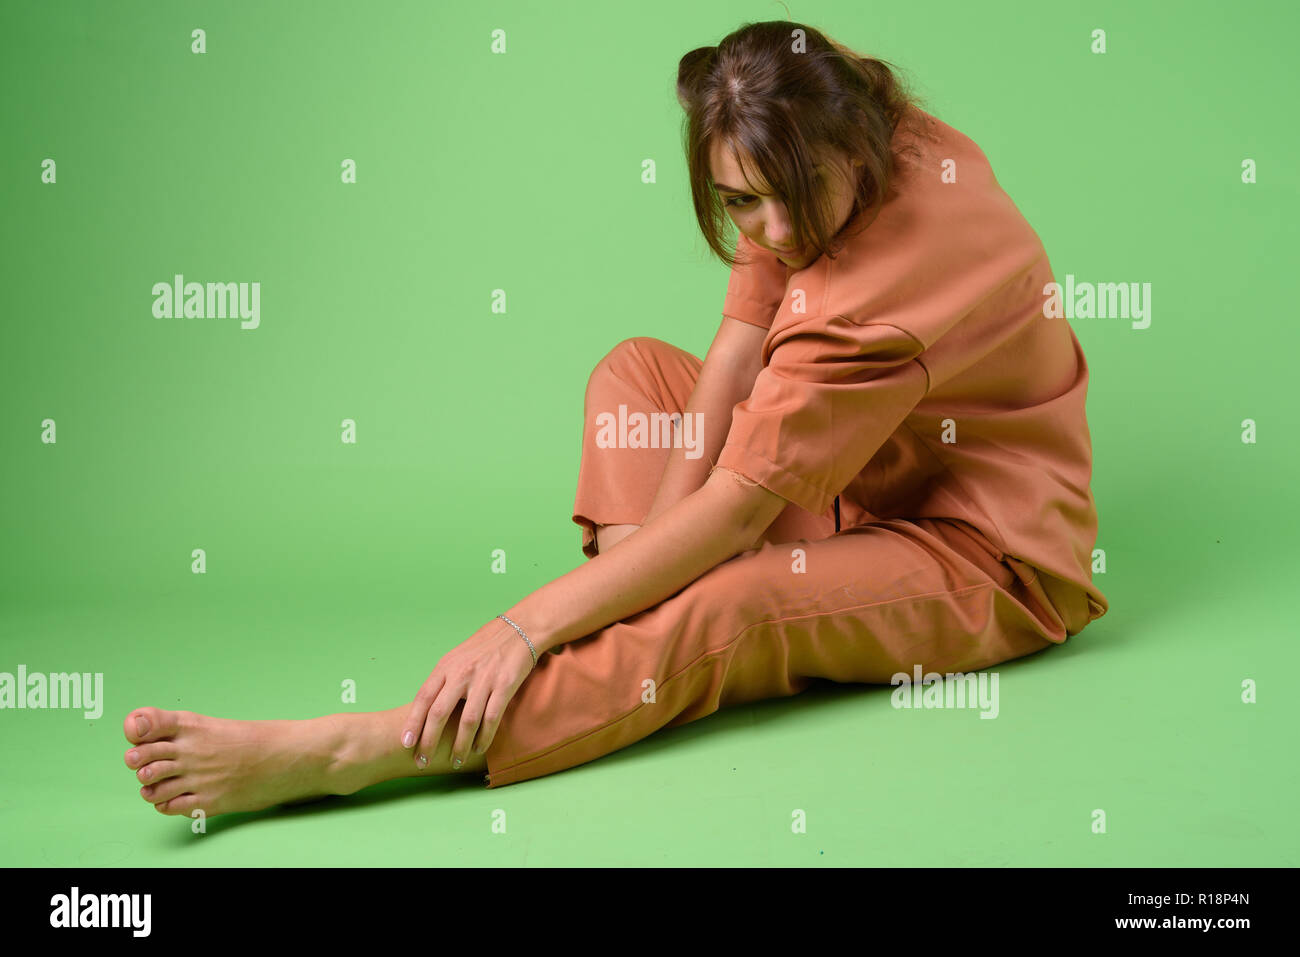 Studio shot of young beautiful woman against green background Stock Photo